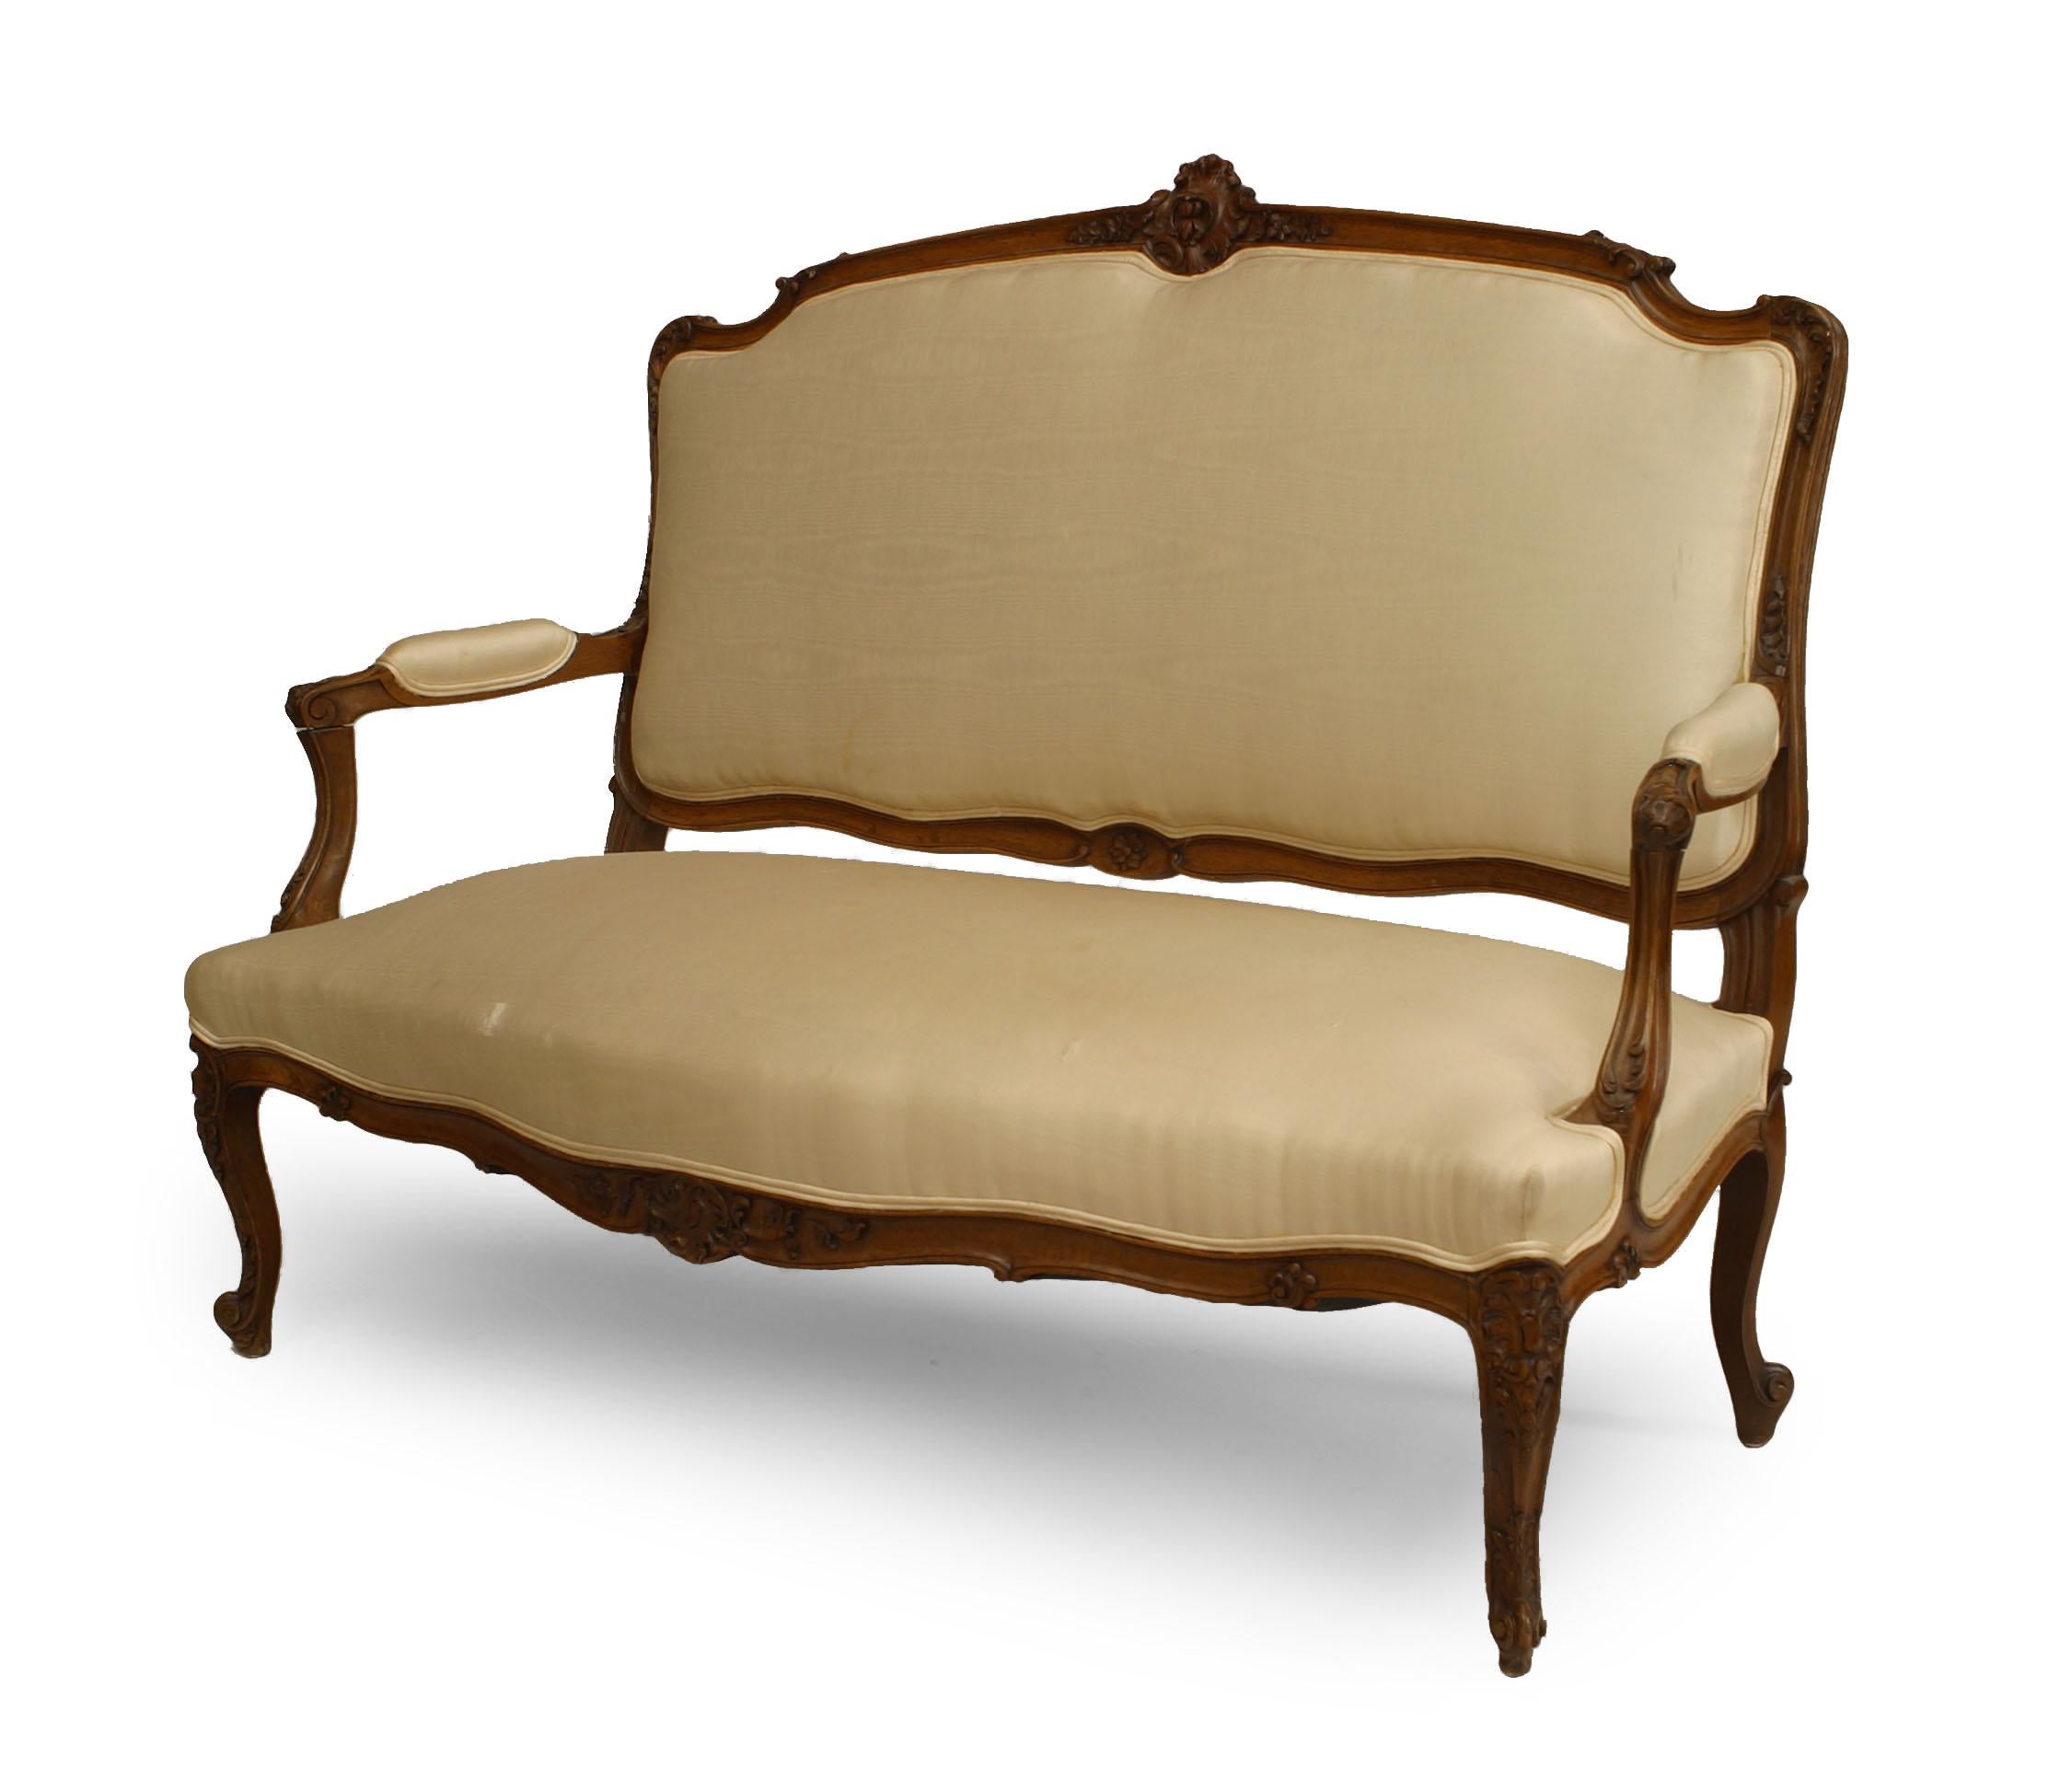 French Louis XV style (19th-20th century) walnut settee with white upholstery and carved back crest.